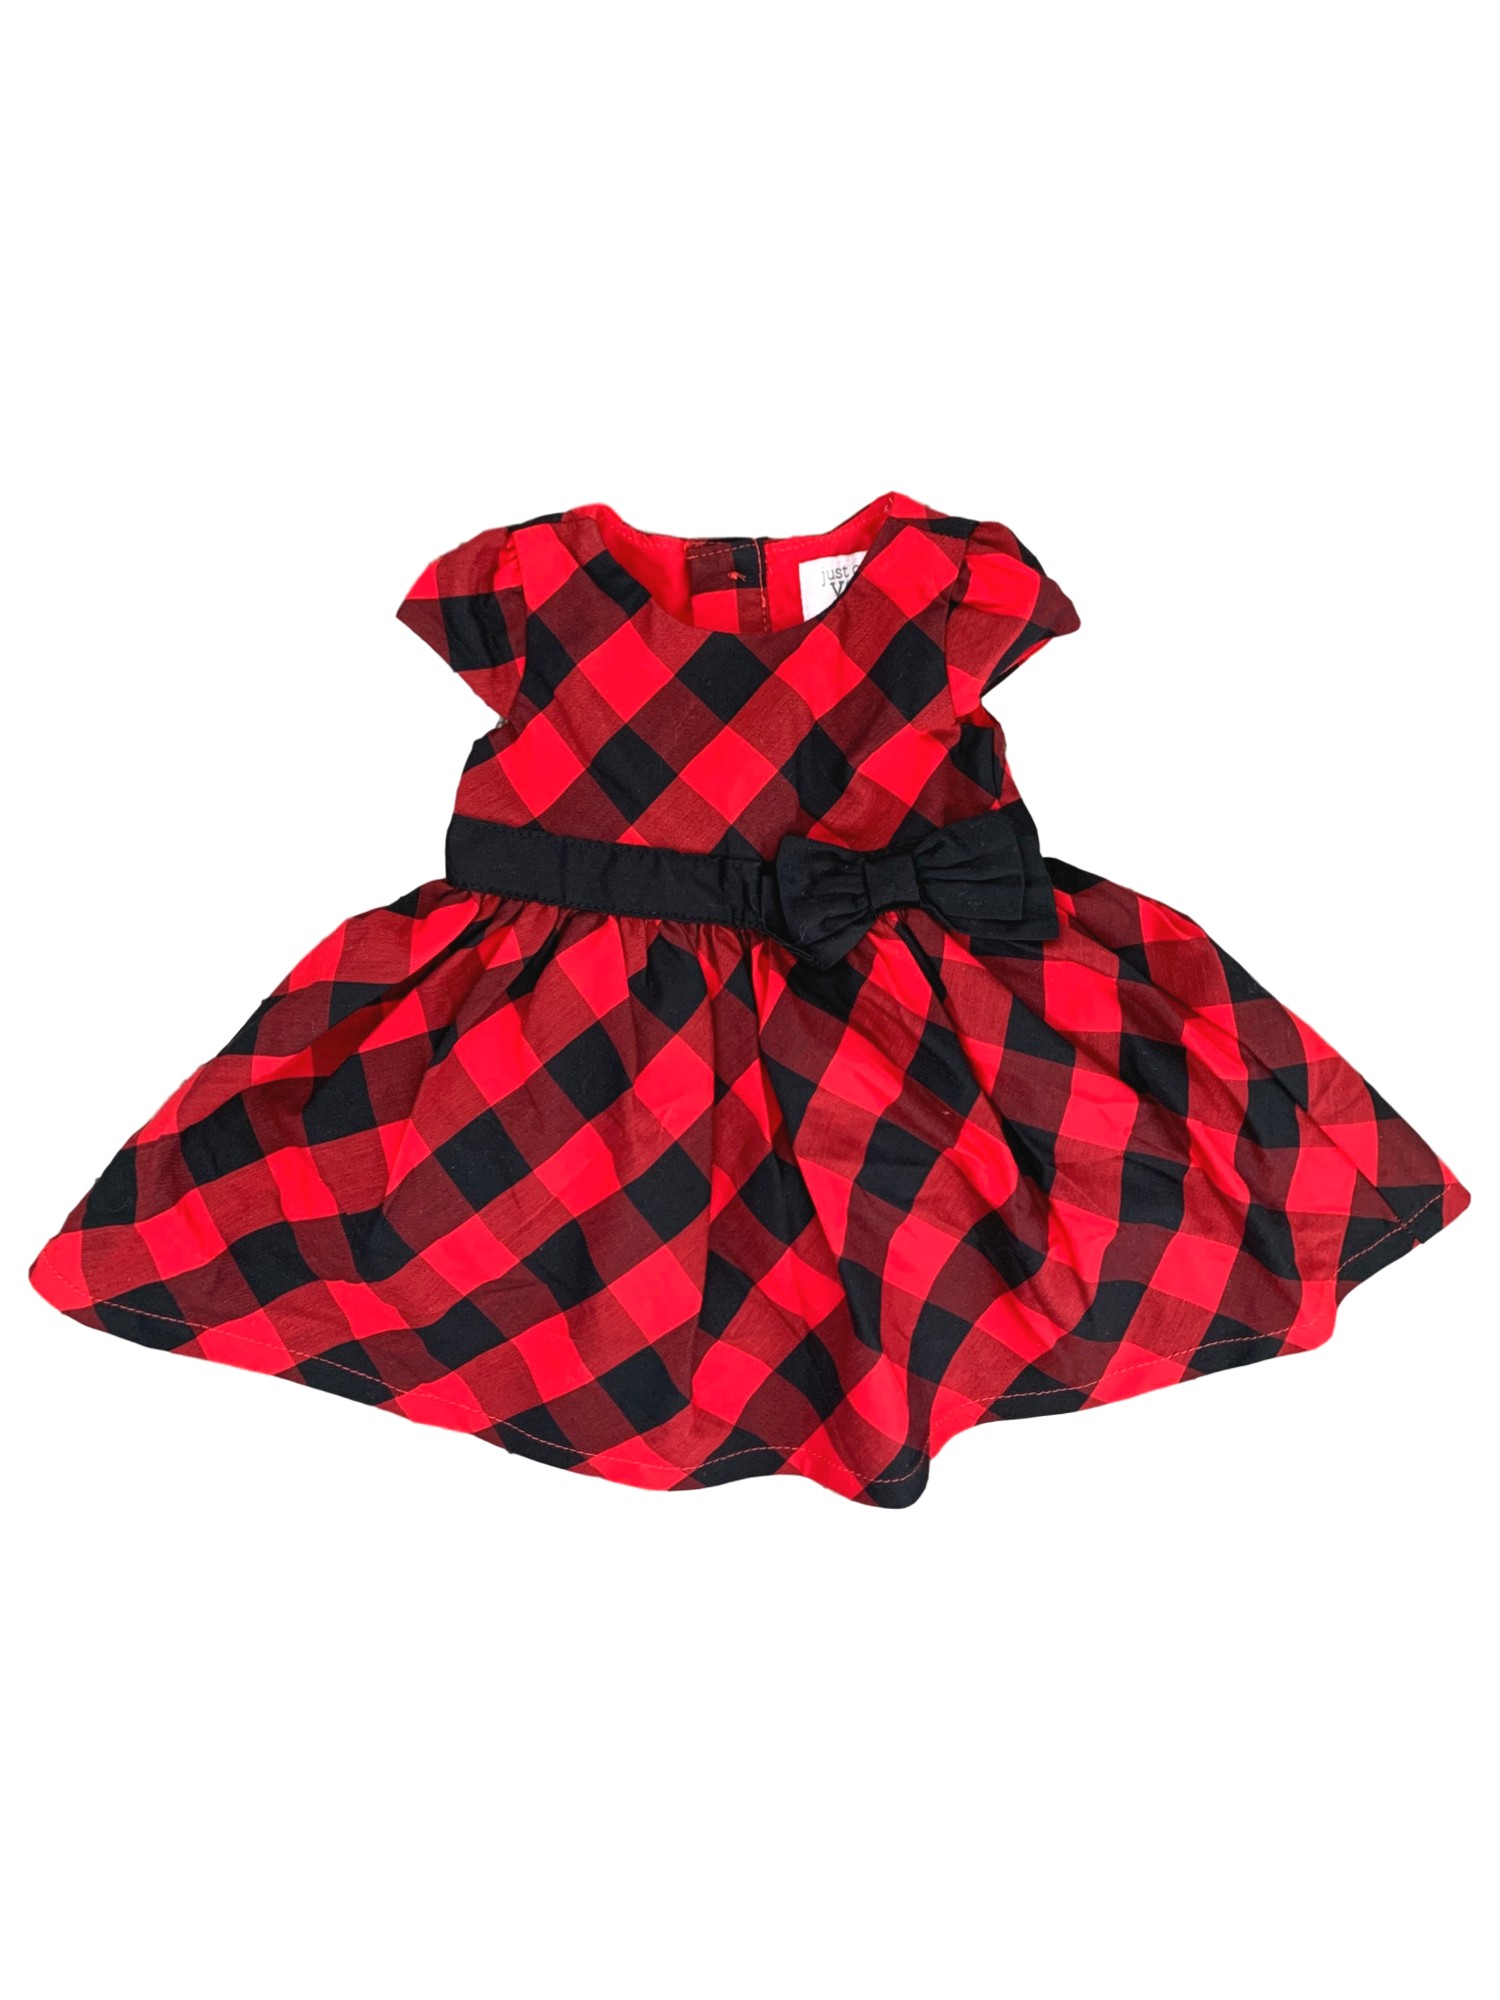 Carter's Carters Infant Girls Red & Black Buffalo Check Bow Holiday Party Dress NB